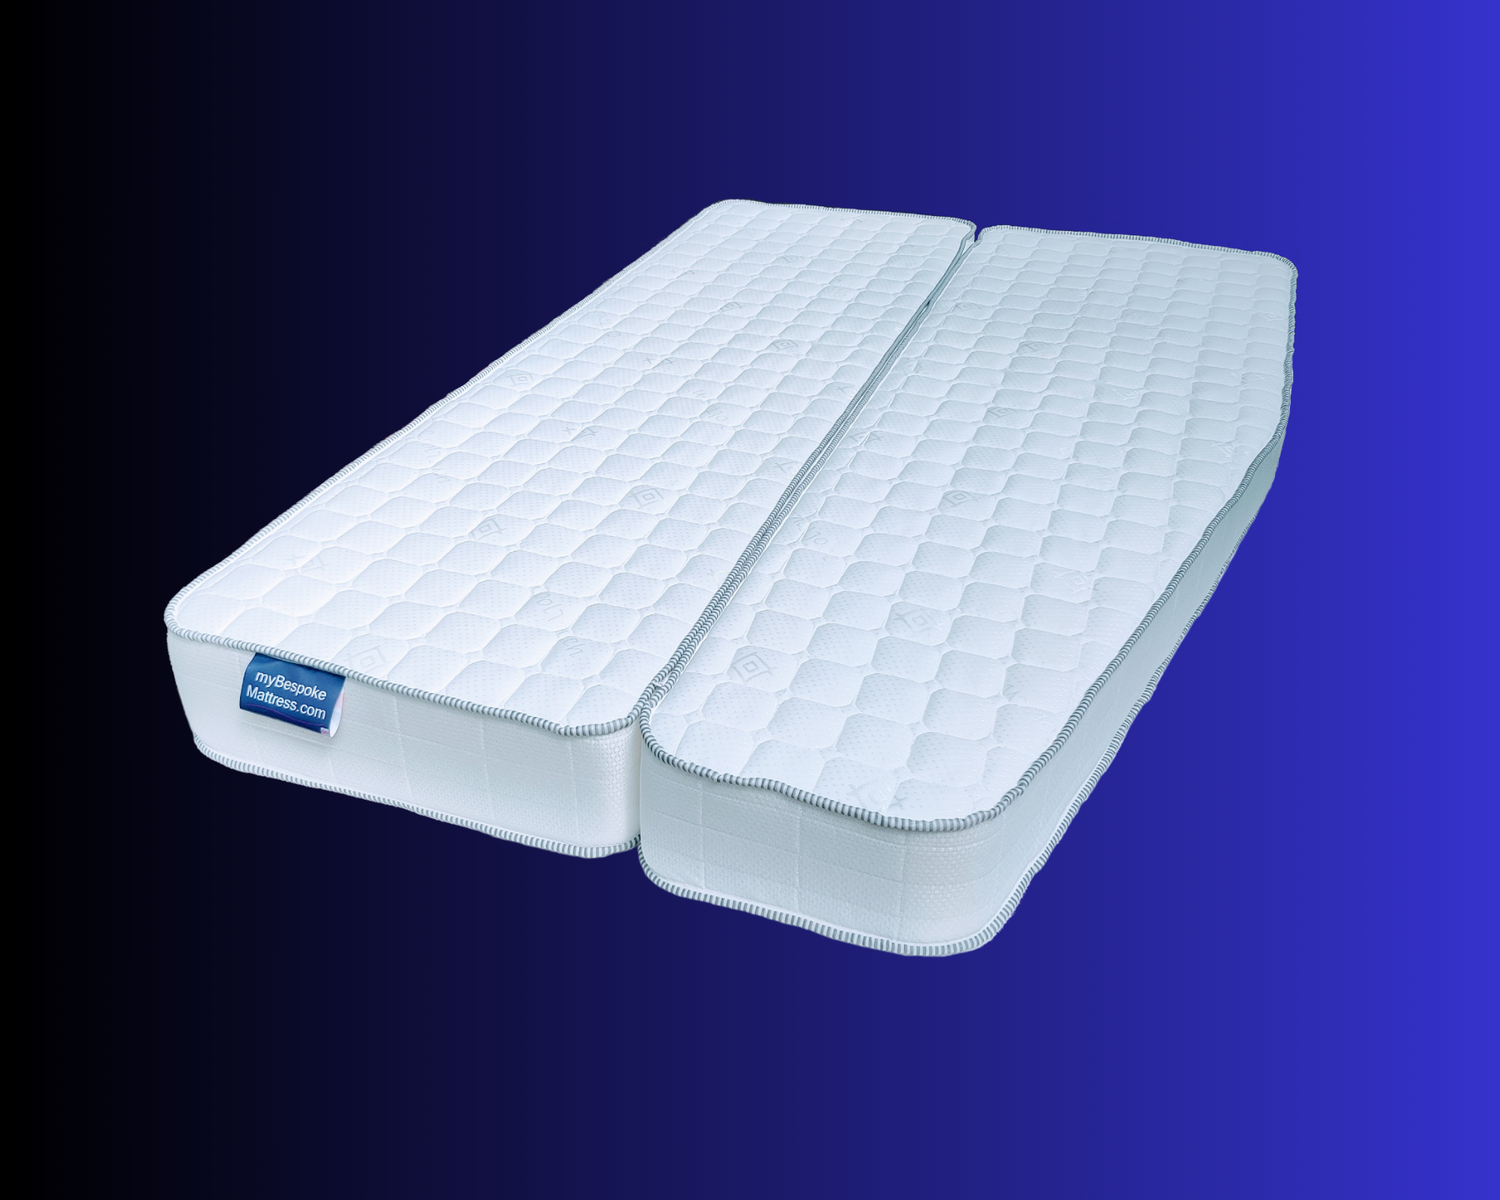 Two Piece Mattress with Zip & Link Attachment on a Blue Background (Product Image)